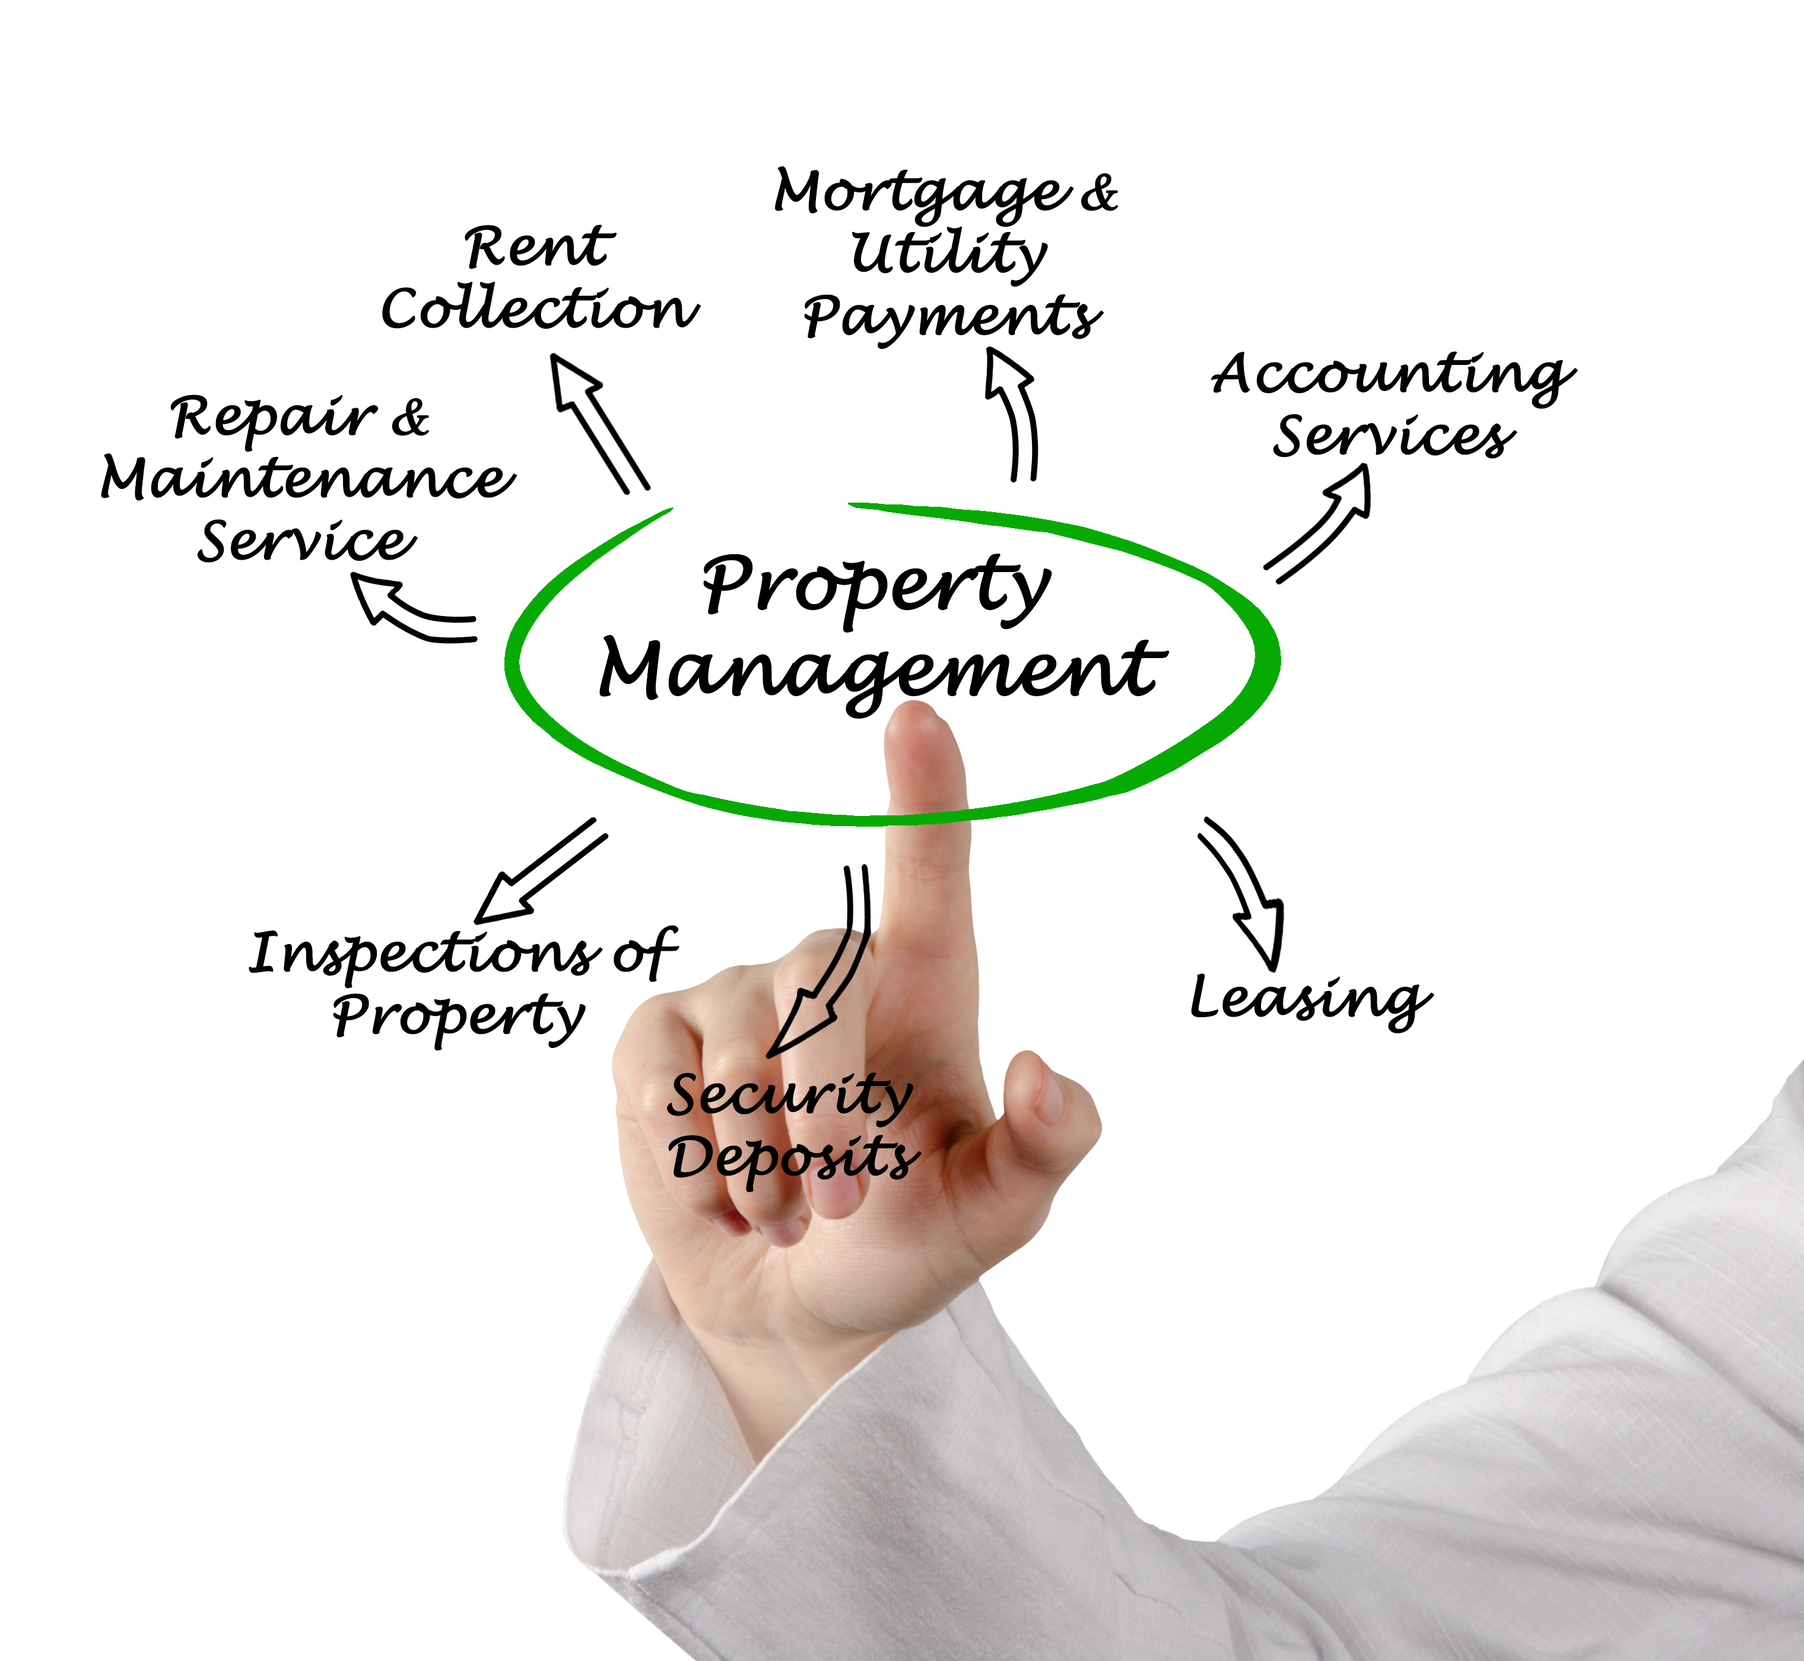 Property Management is defined as including: "Rent Collection, Mortgage & Utility Payments," "Accounting Services," "Leasing," "Security Deposits," "Inspections of Property," "Repair & Maintenance Service," and "Rent Collection."